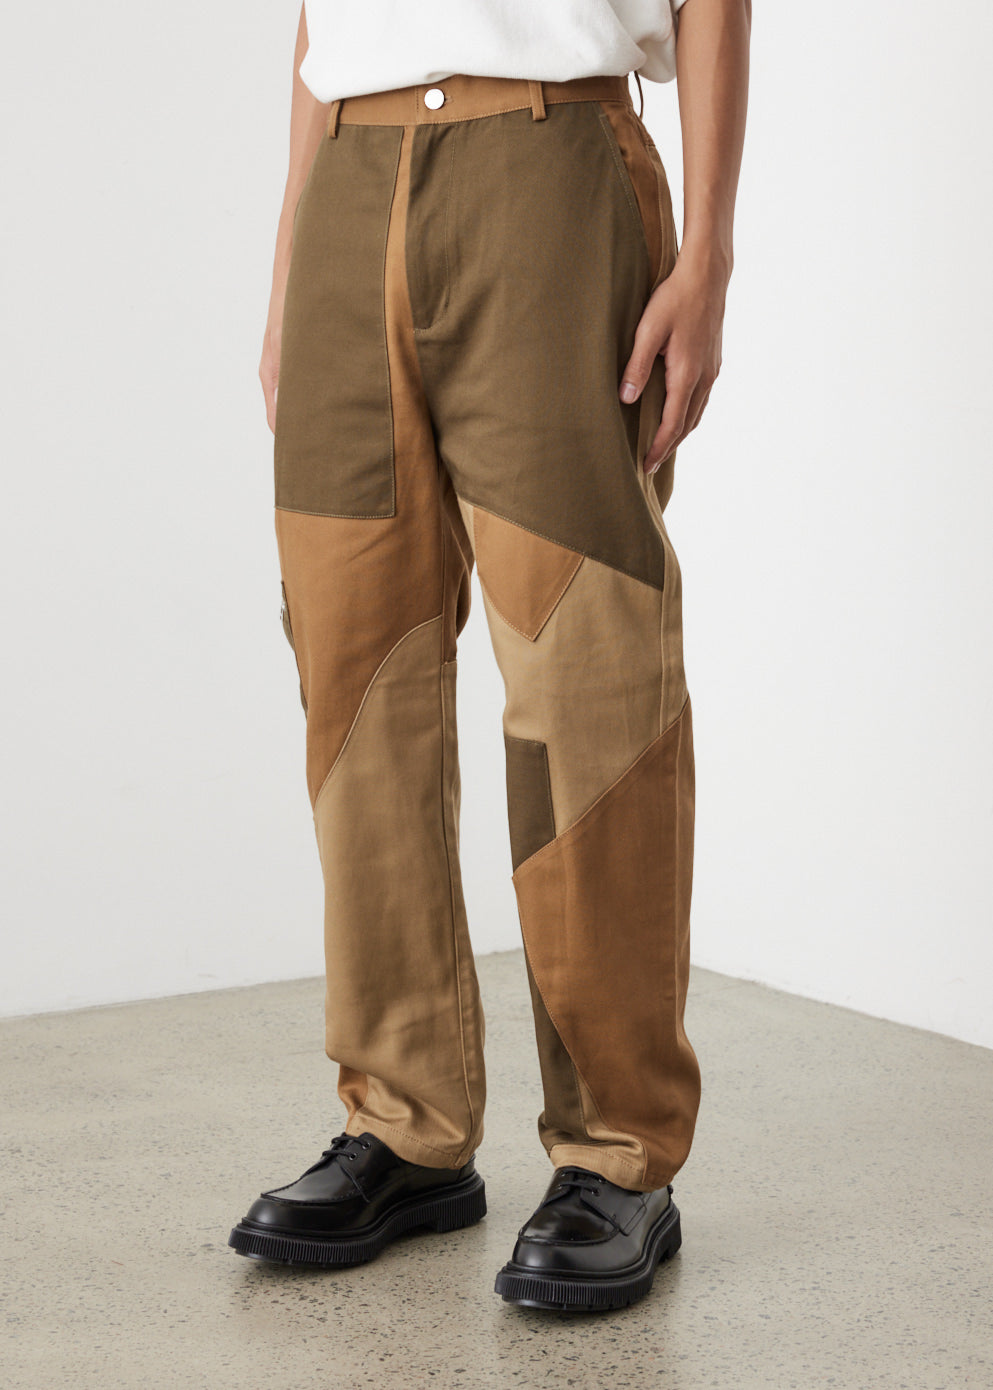 Patchwork Fatigue Trousers